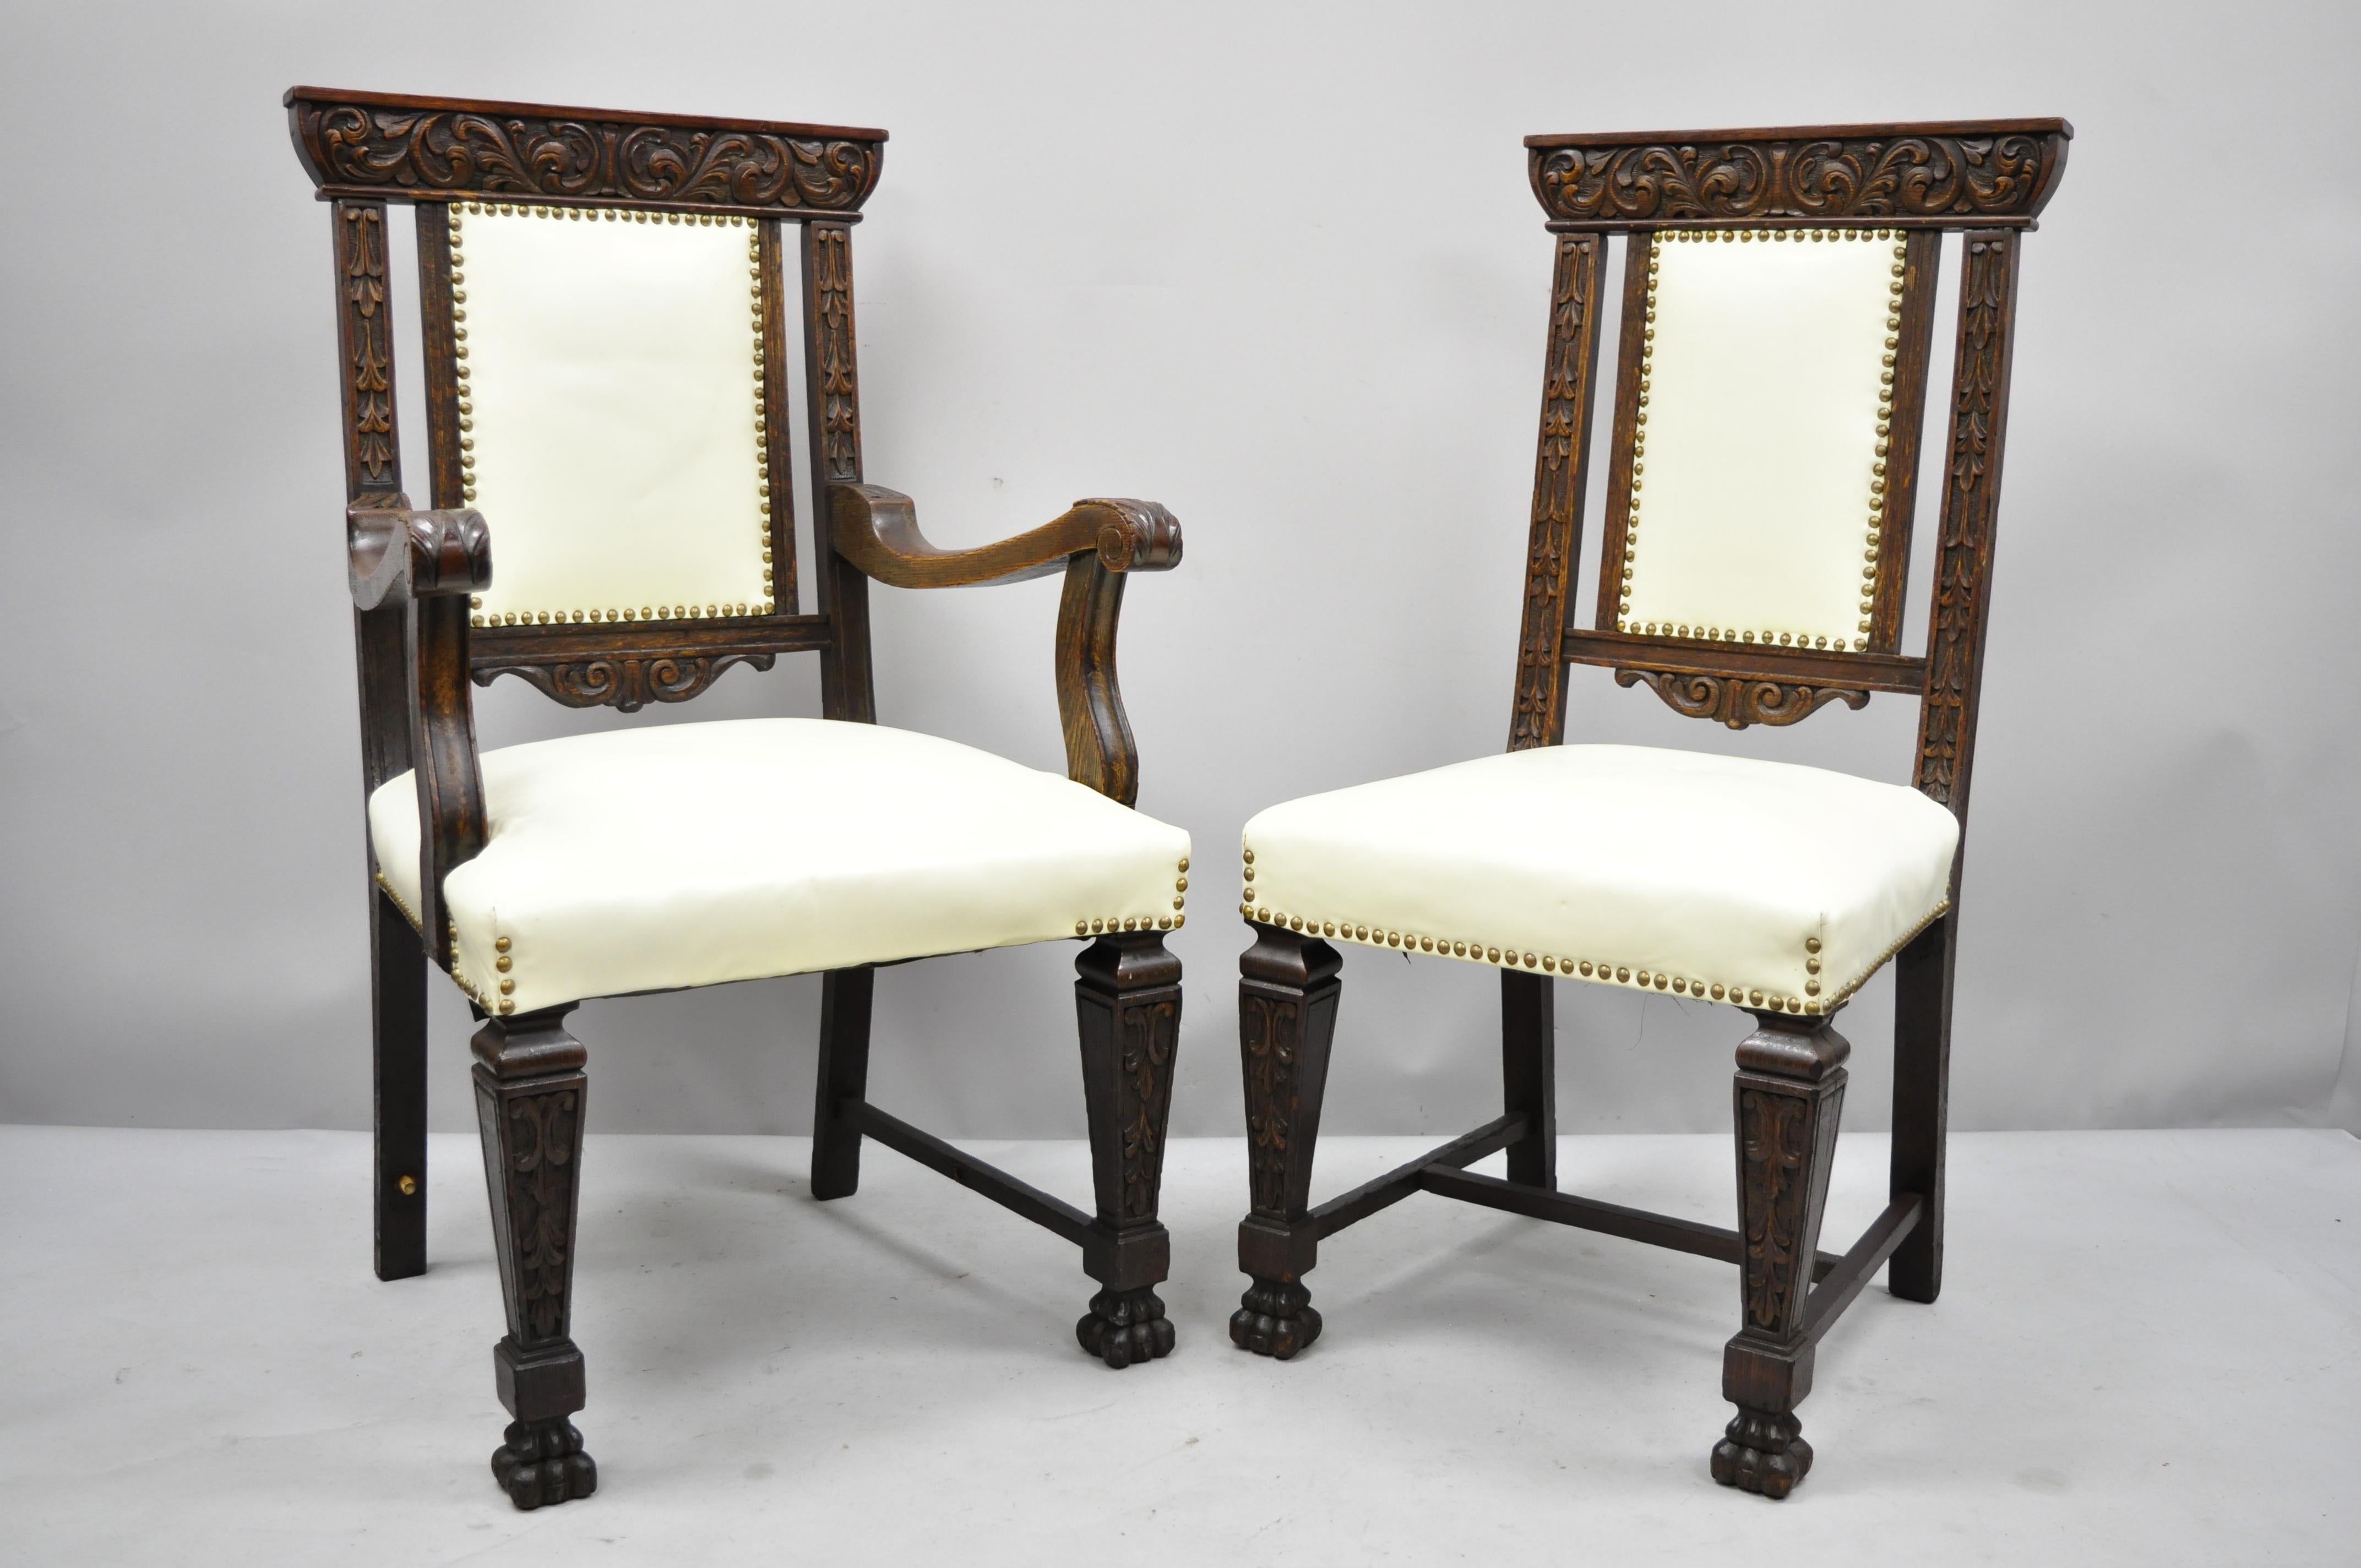 6 Antique Italian Renaissance Carved Oak Wood Upholstered Dining Chairs For Sale 4